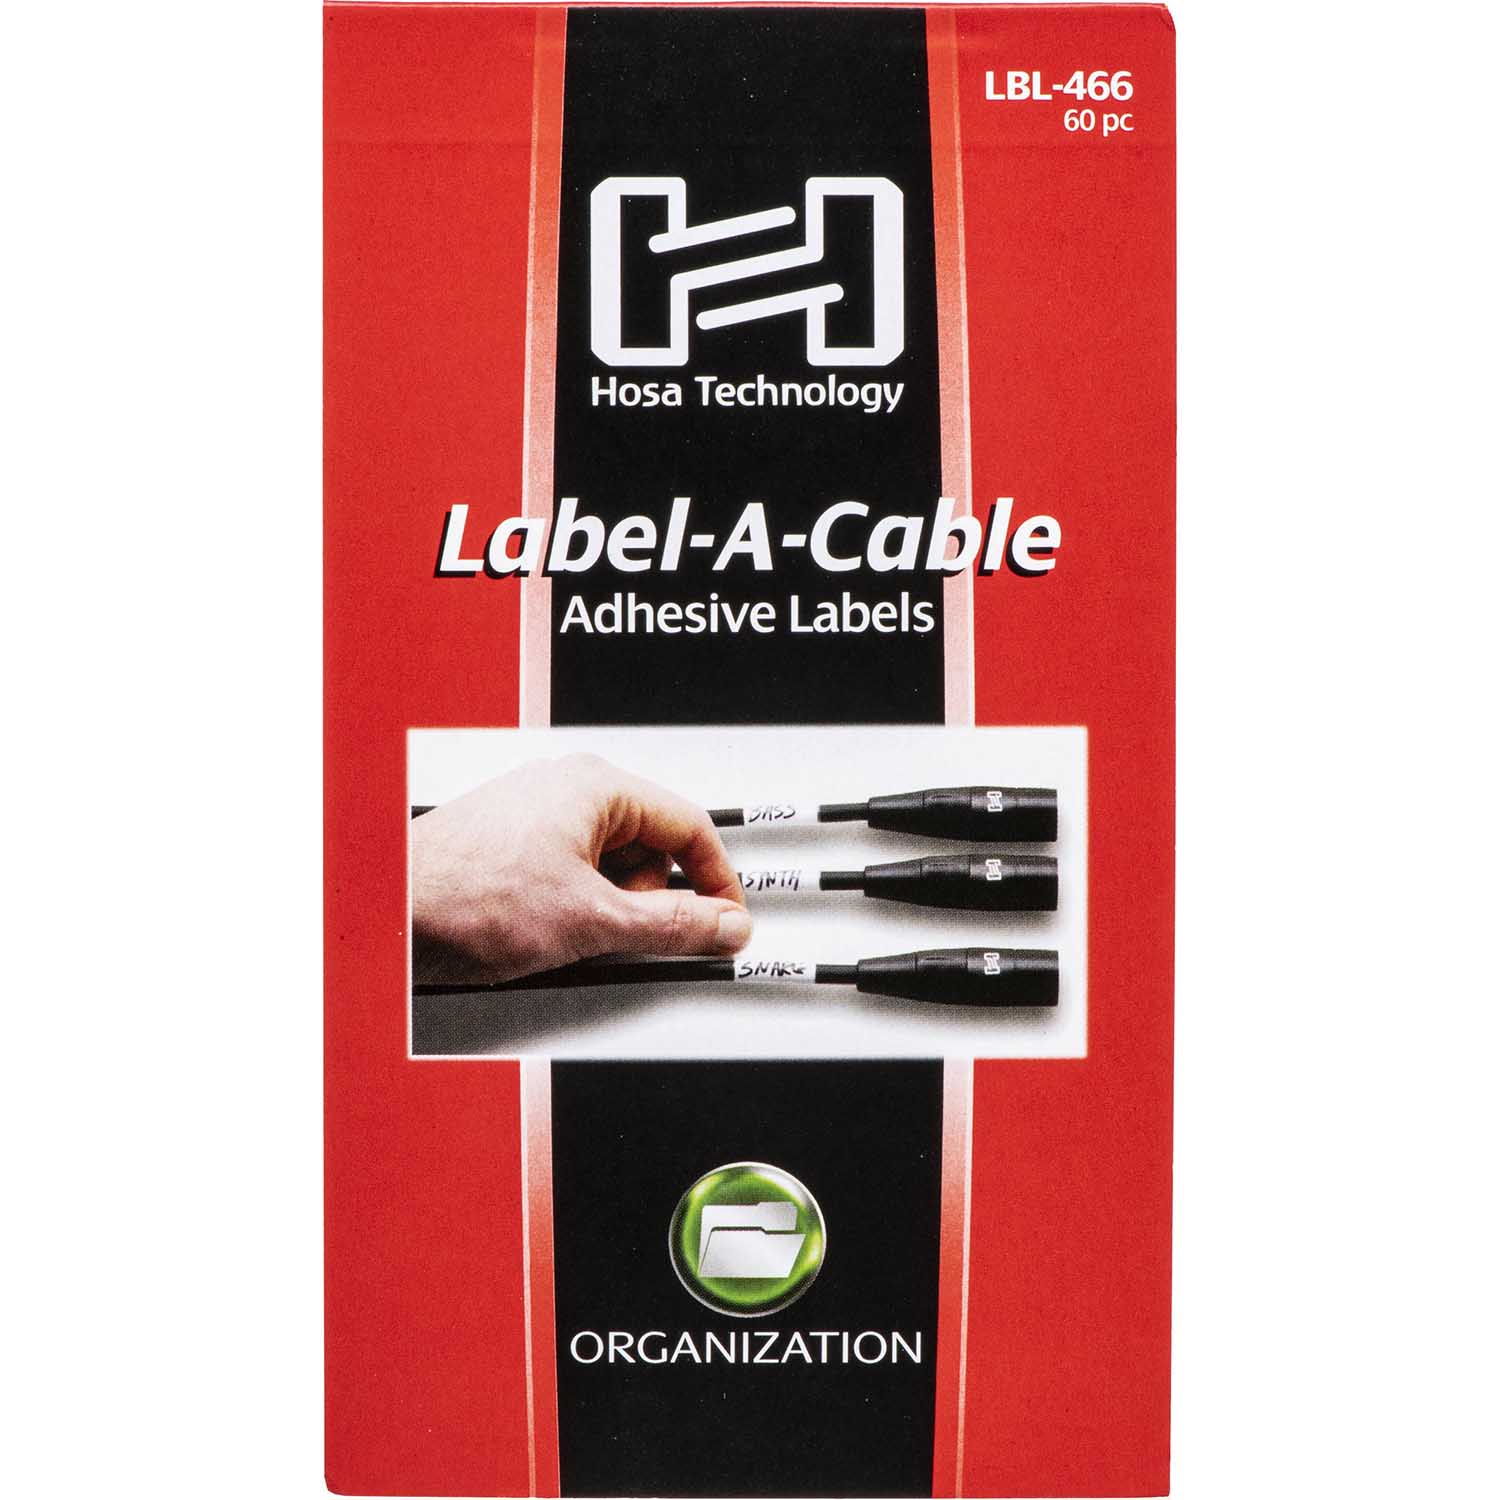 Hosa LBL-466 Peel and Stick Vinyl Cable Labels - 60 Pieces - Hollywood DJ